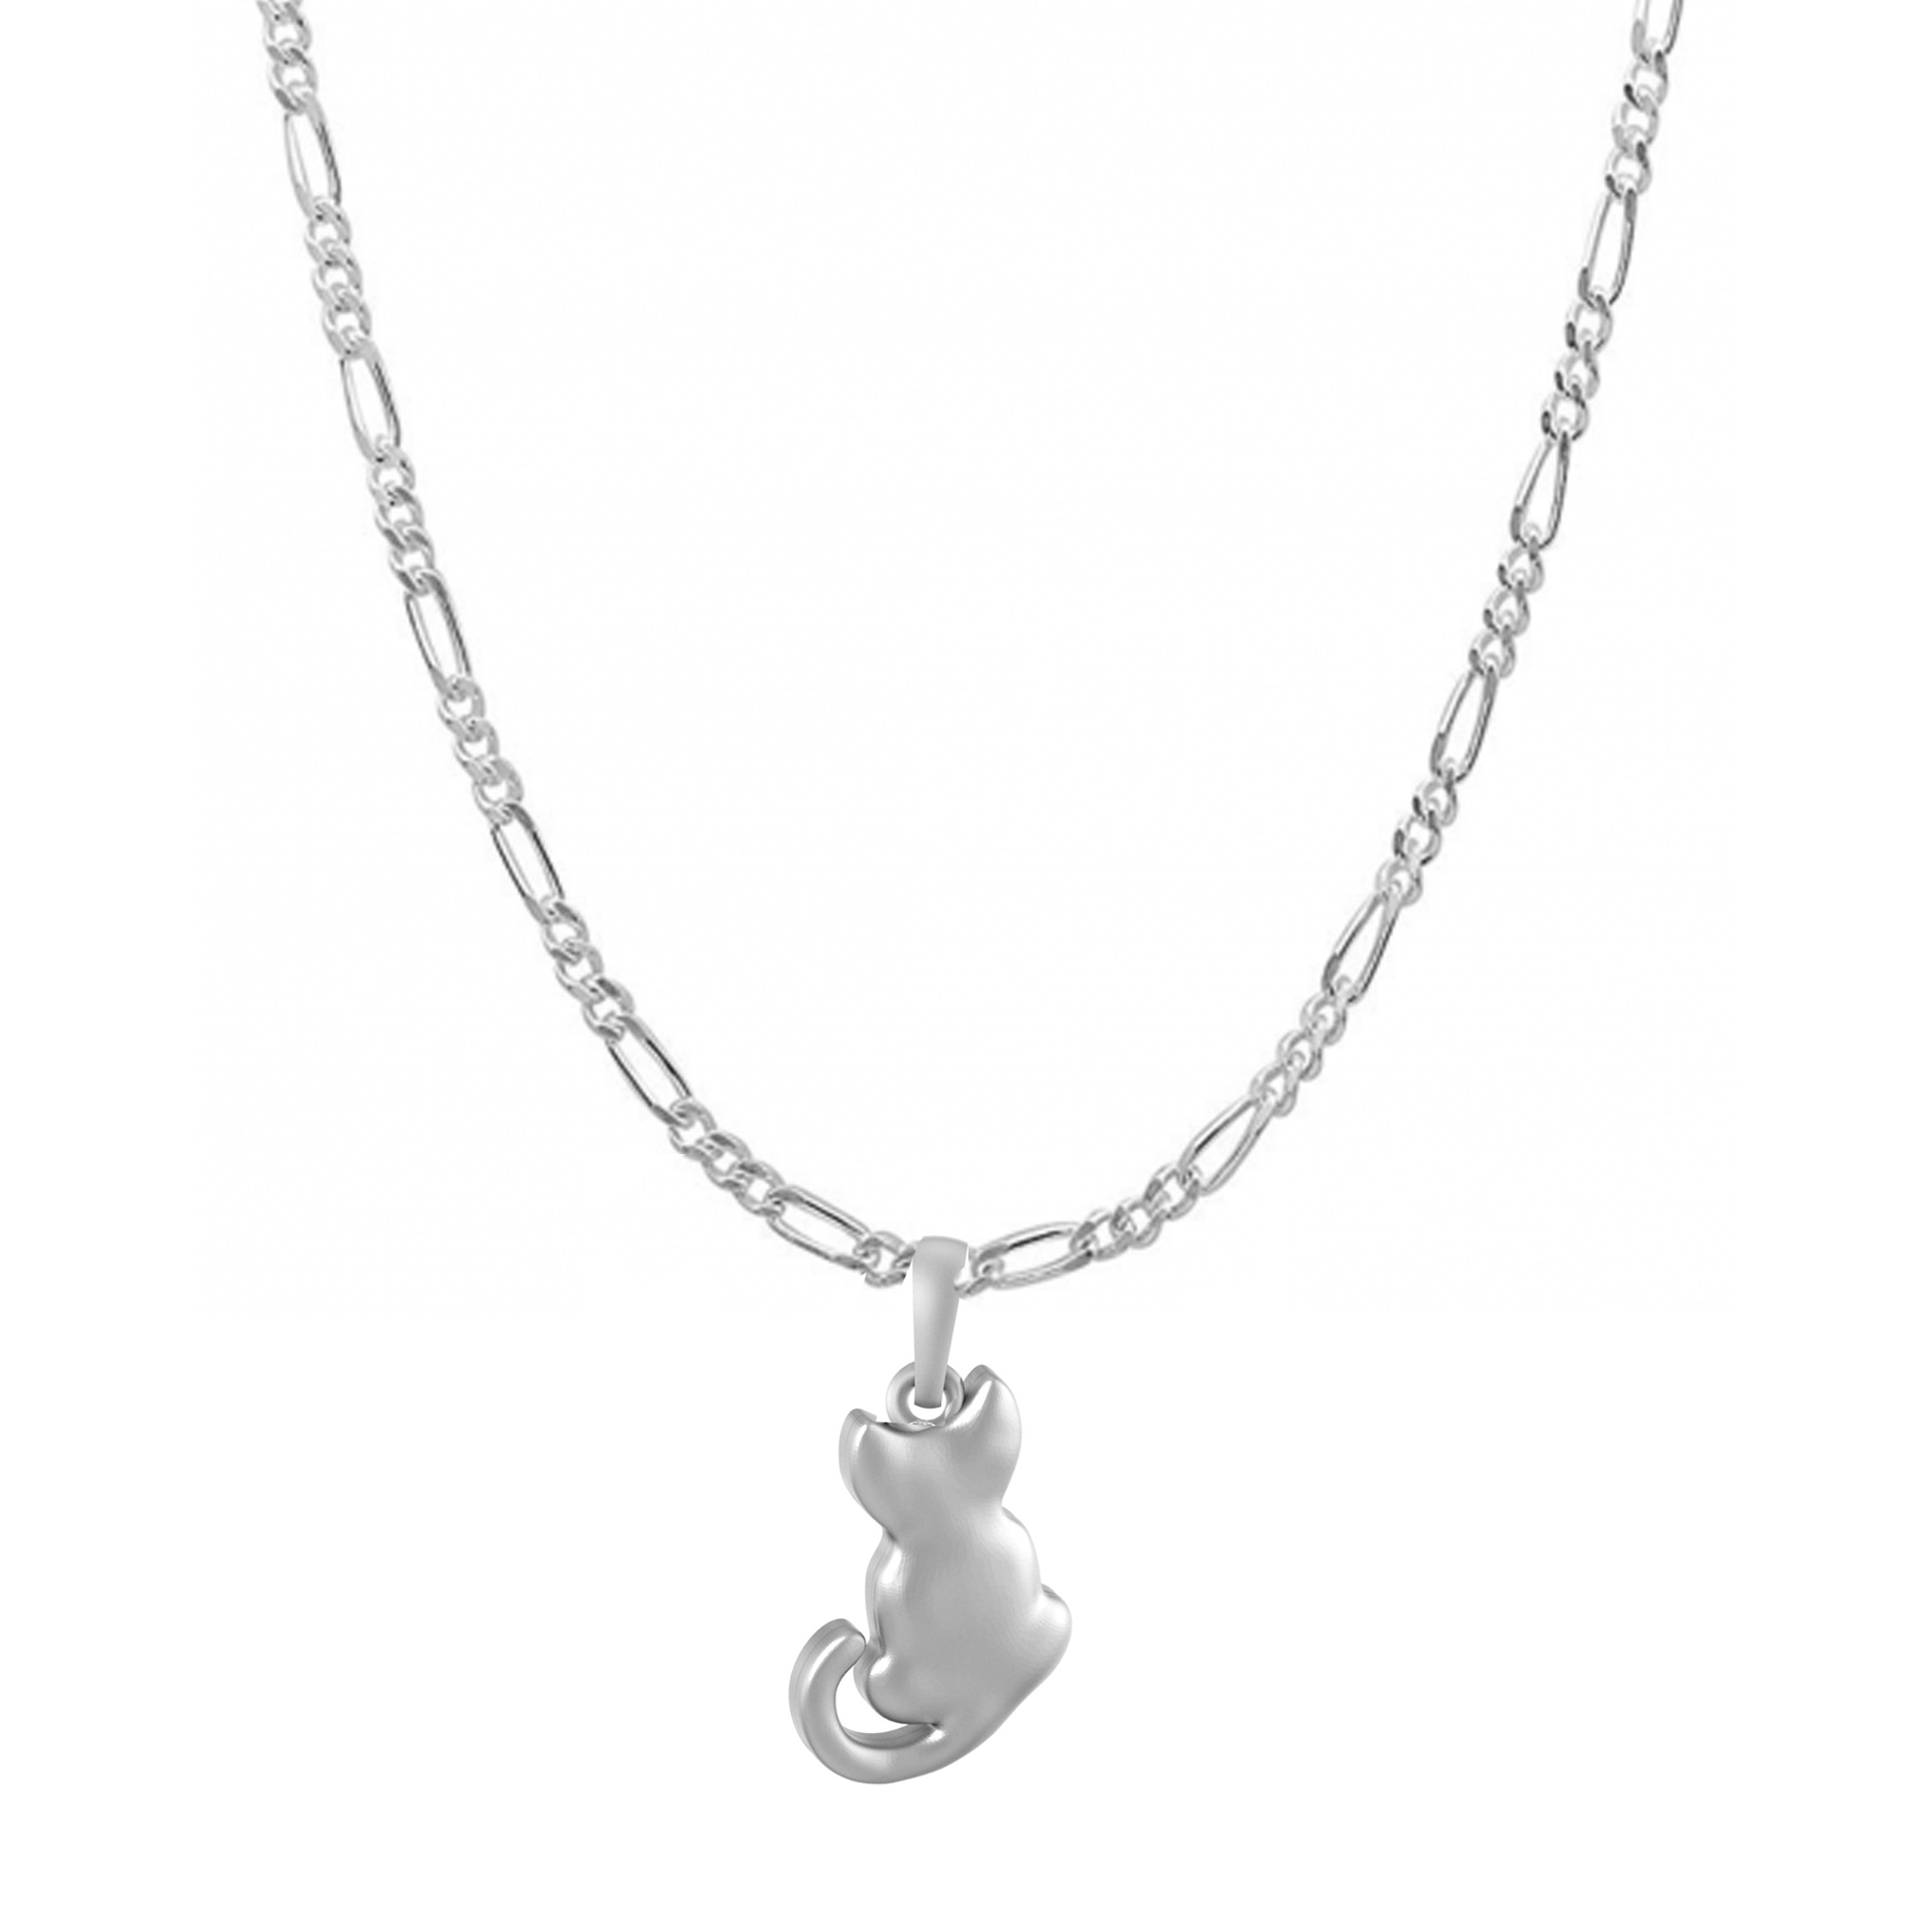 Akshat Sapphire Sterling Silver (92.5% purity) Stylish and Fashionable Cute Cat Chain Pendant (Pendant with Figaro Chain) for Men & Women Pure Silver Cat Chain Locket for Happiness and joy